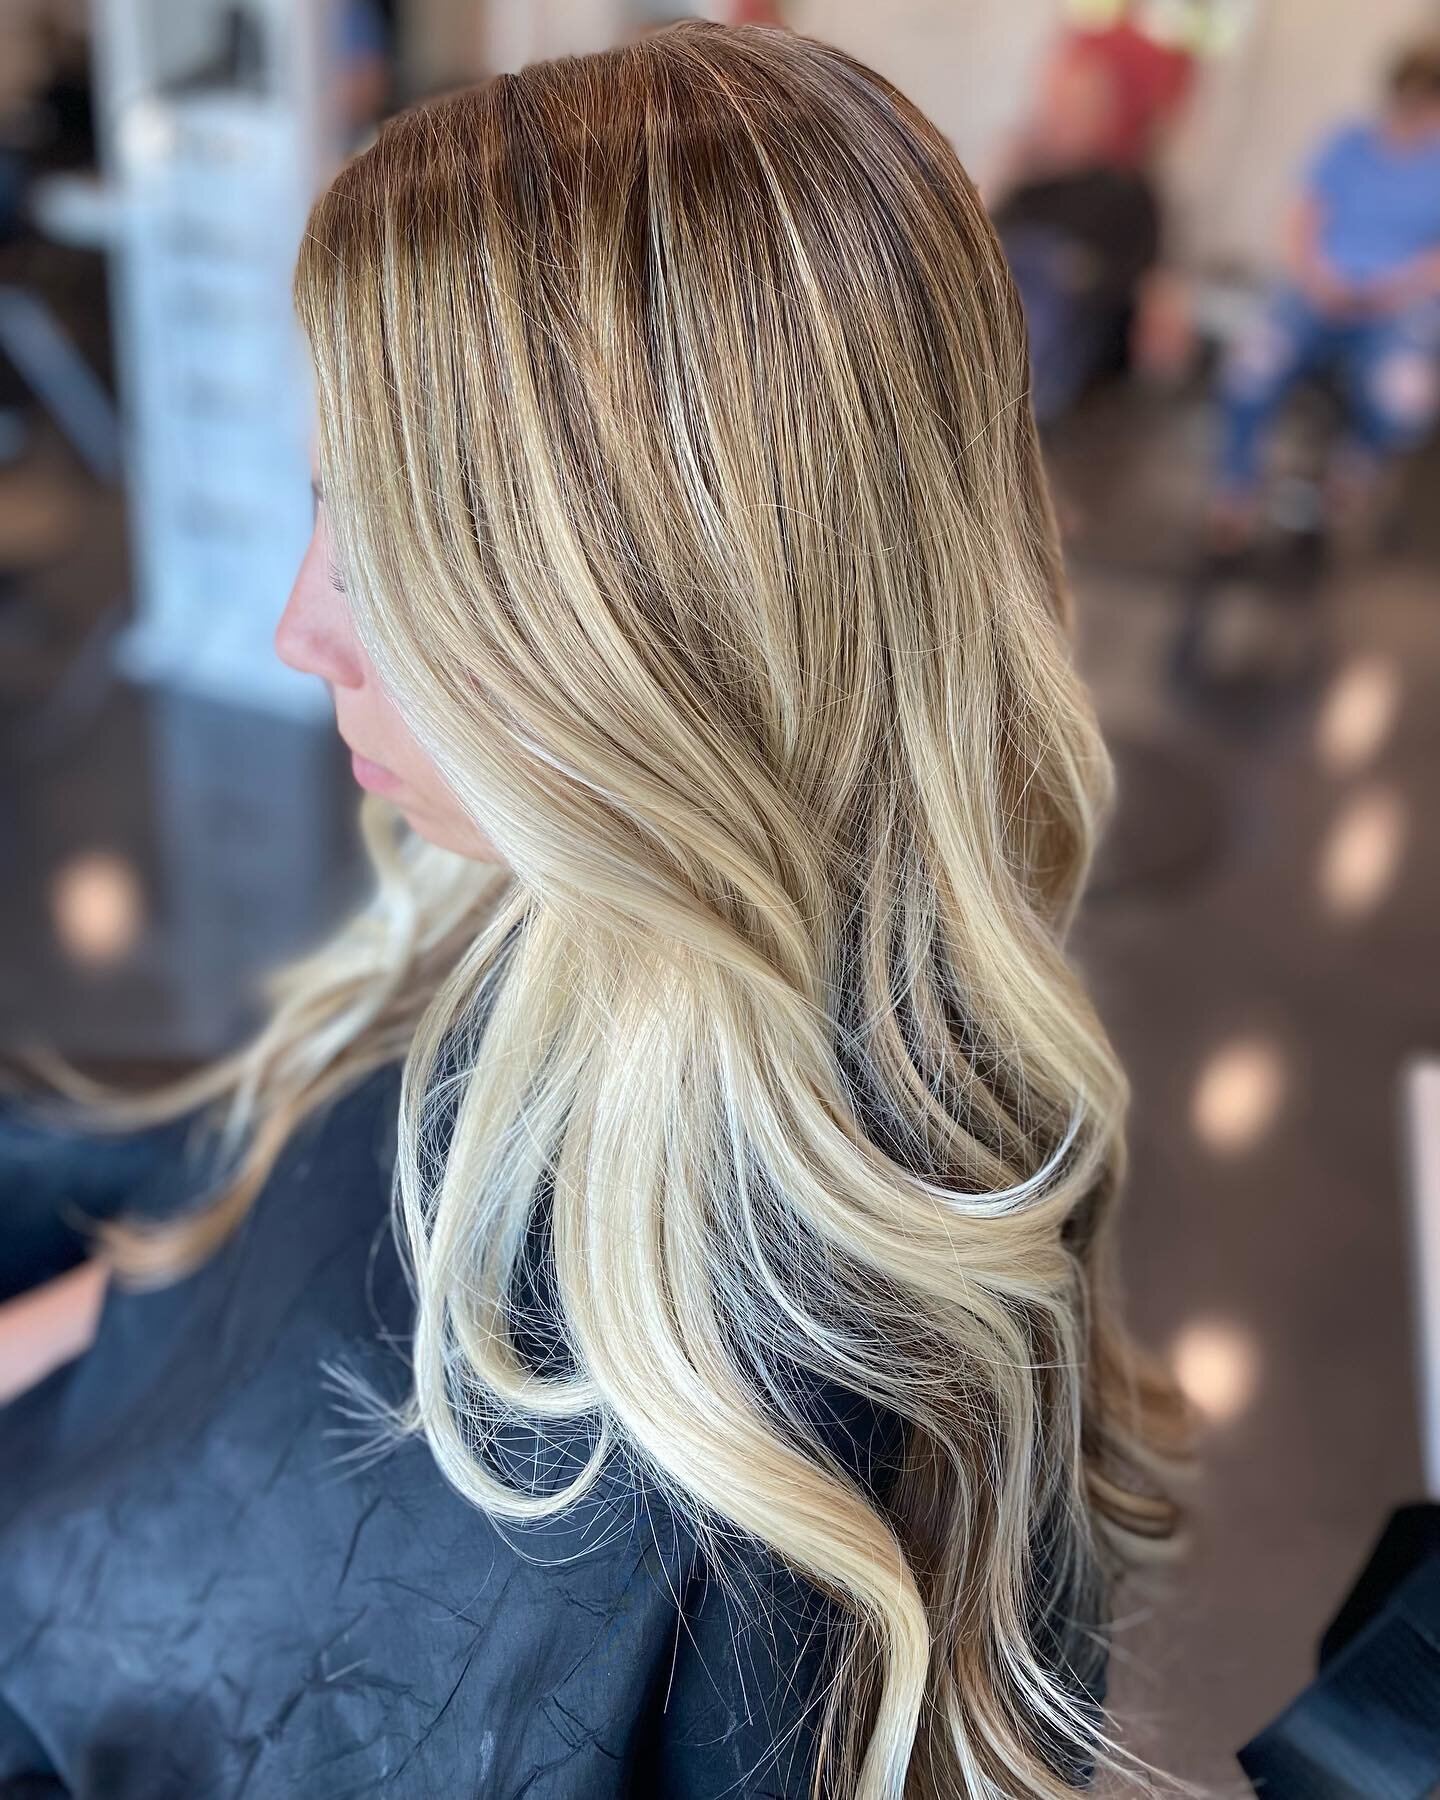 Gasping at this beautiful balayage done by @christipatten.hair !!